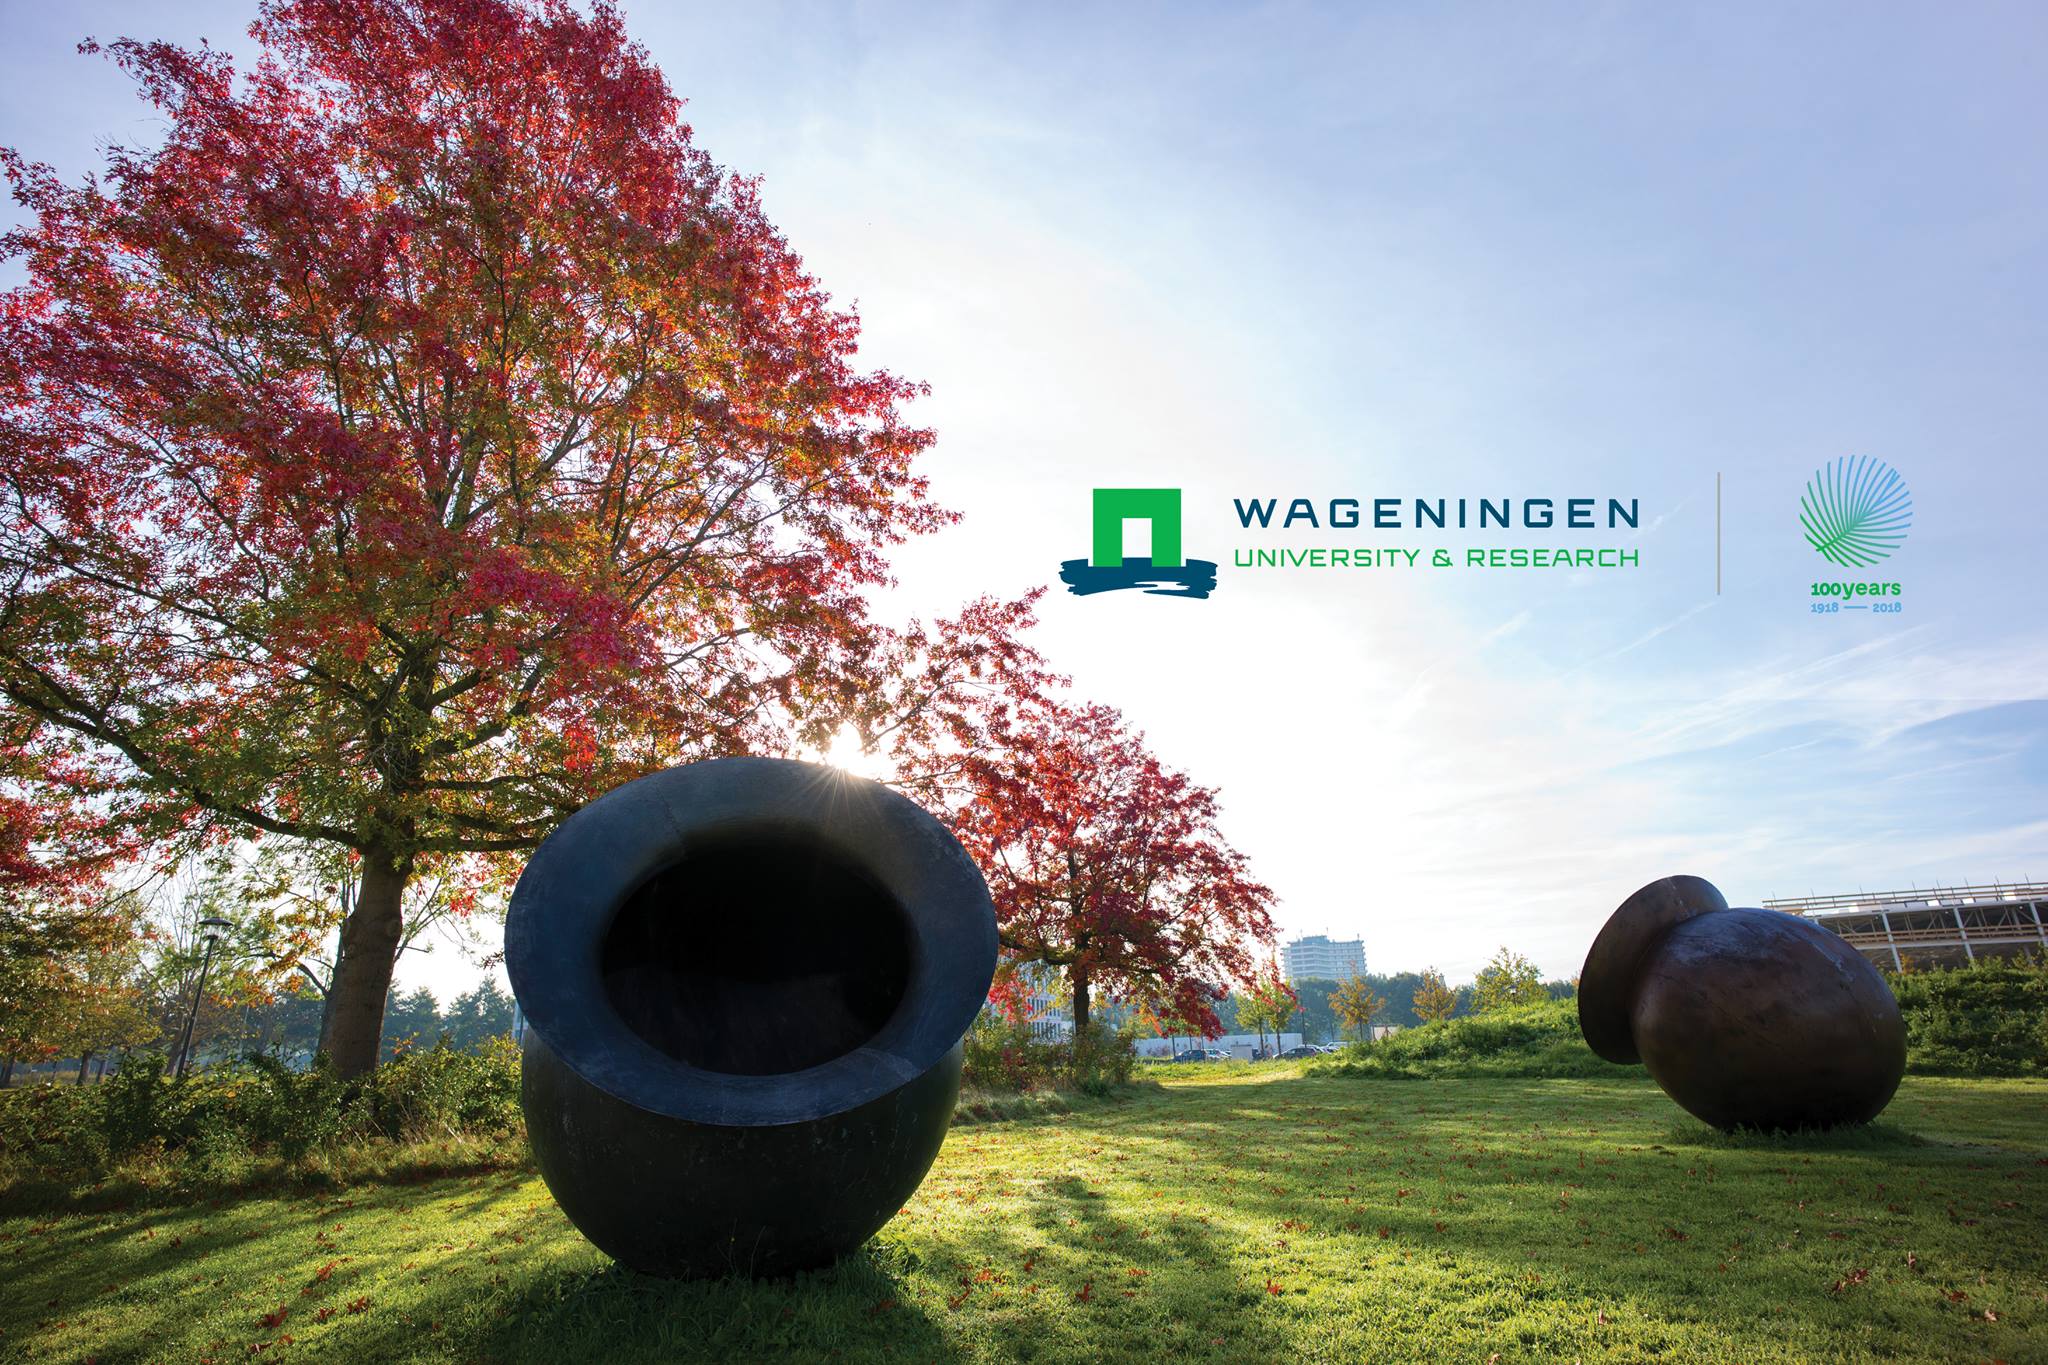 Wageningen University Africa Scholarship Programme (Masters) 2022/2023 for African Students – The Netherlands